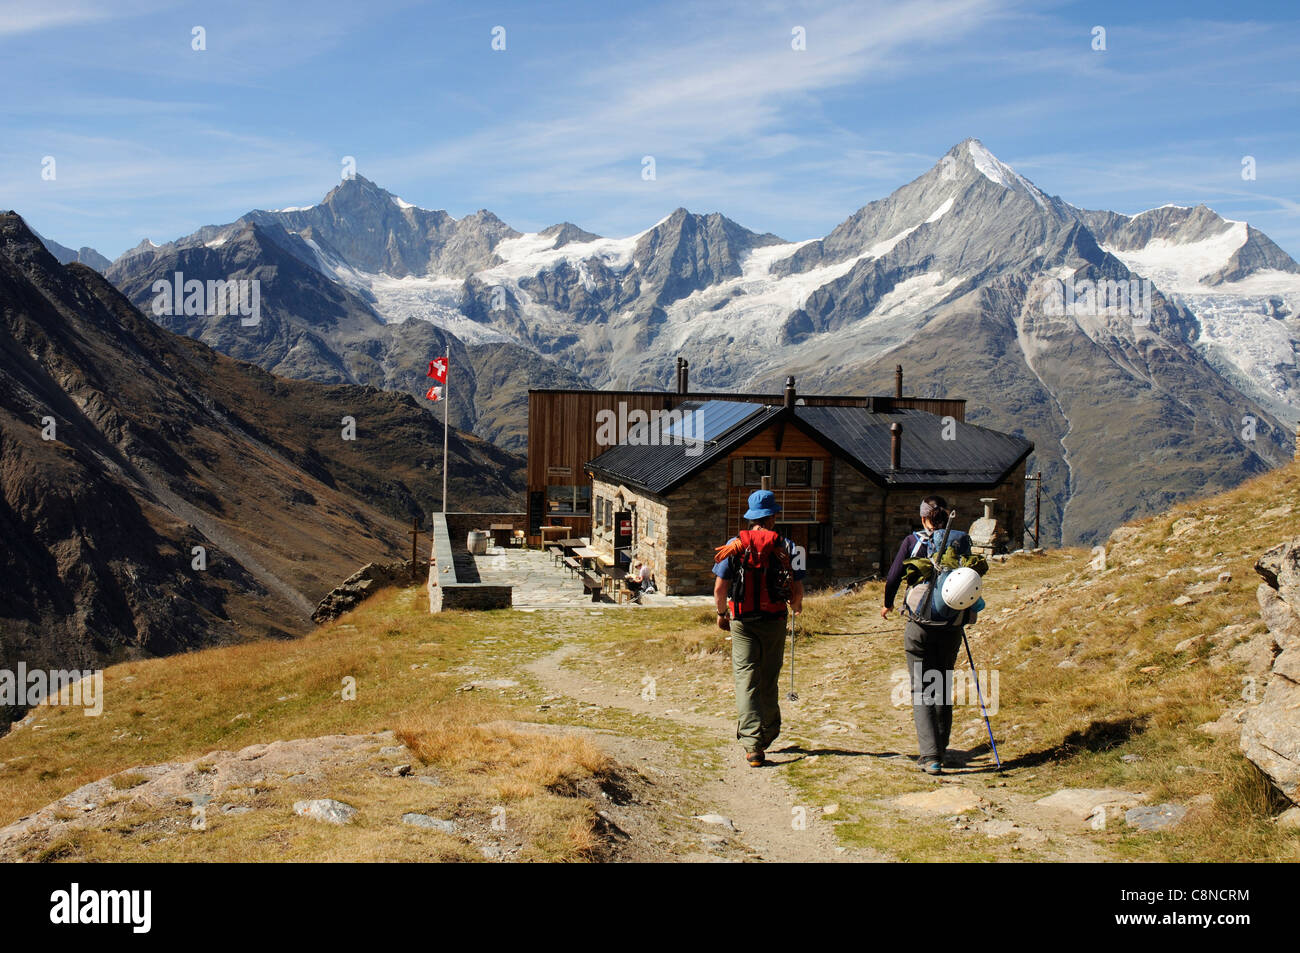 Two people approaching the Tasch hut in the Swiss Alps Stock Photo